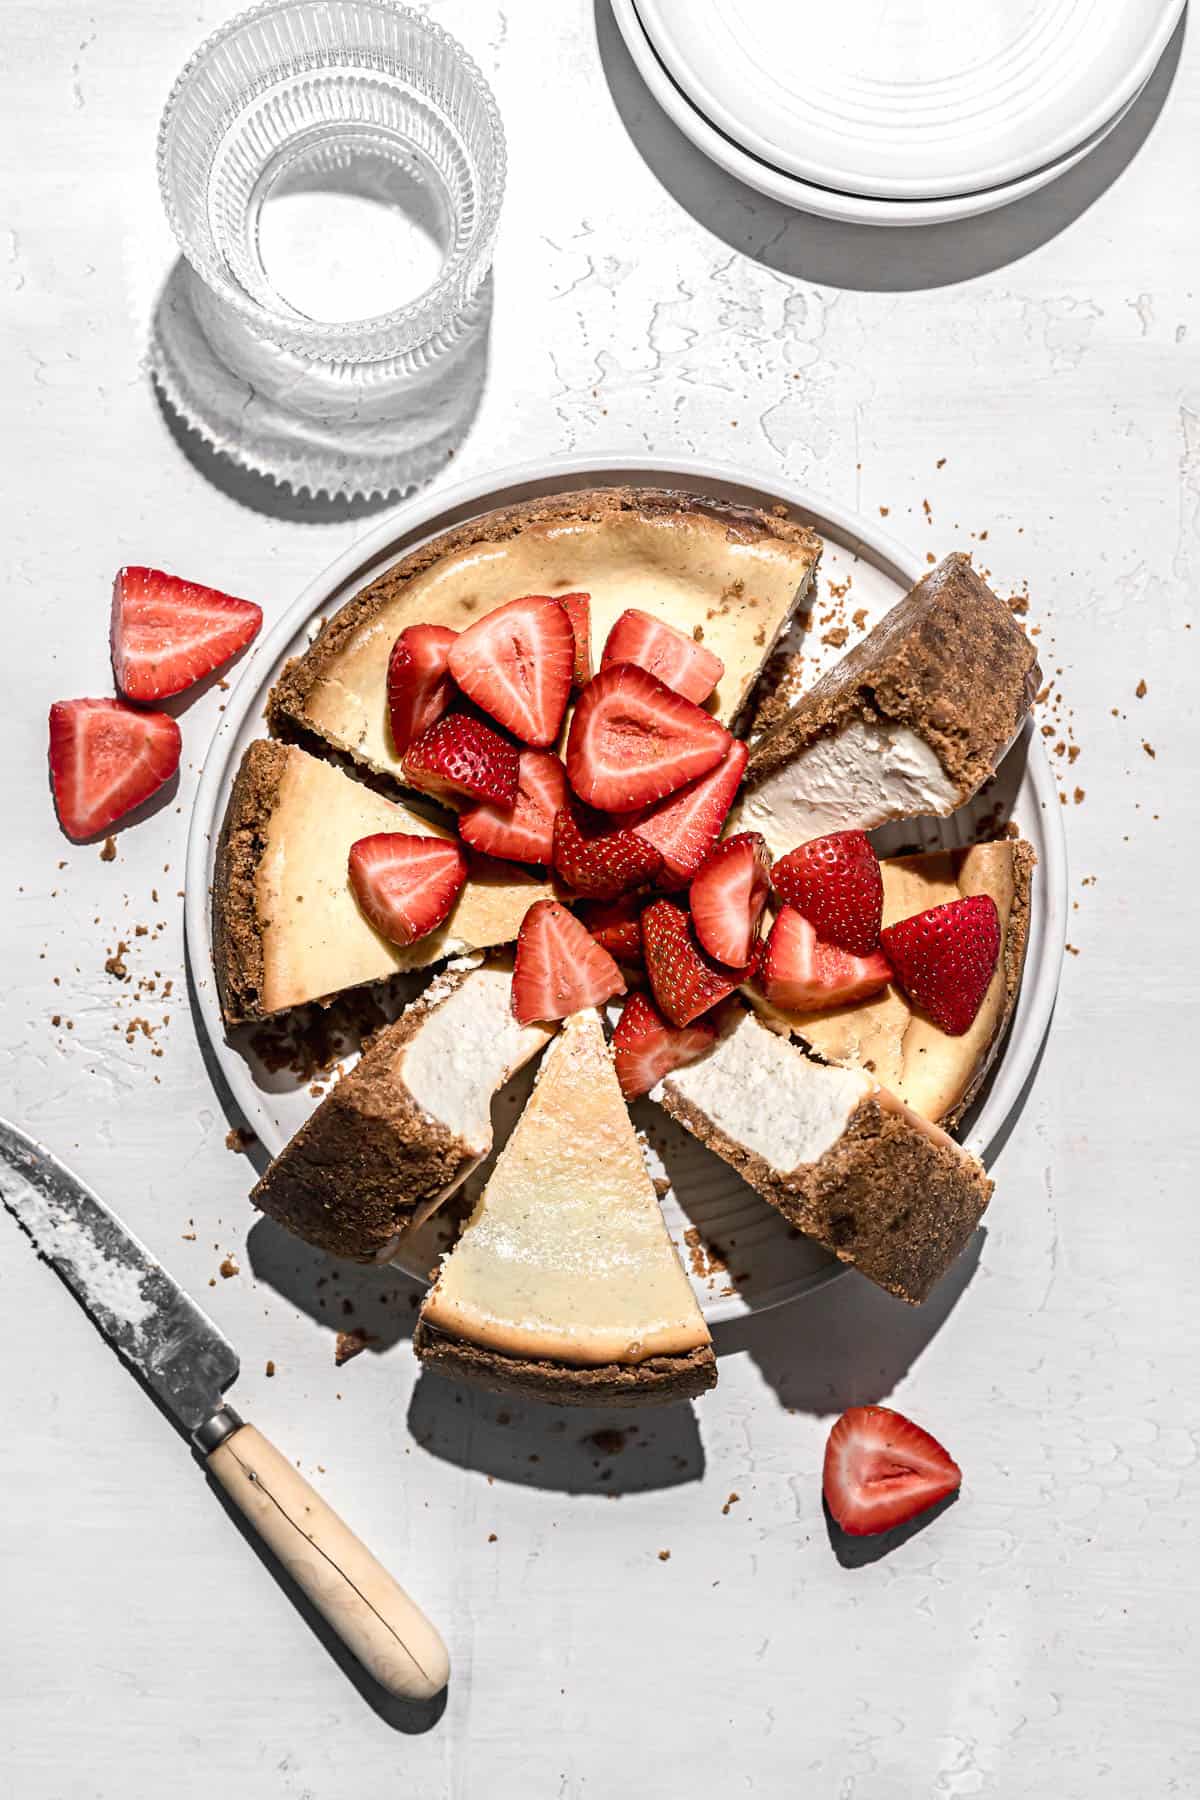 ricotta cheesecake with strawberries cut into slices on white plate